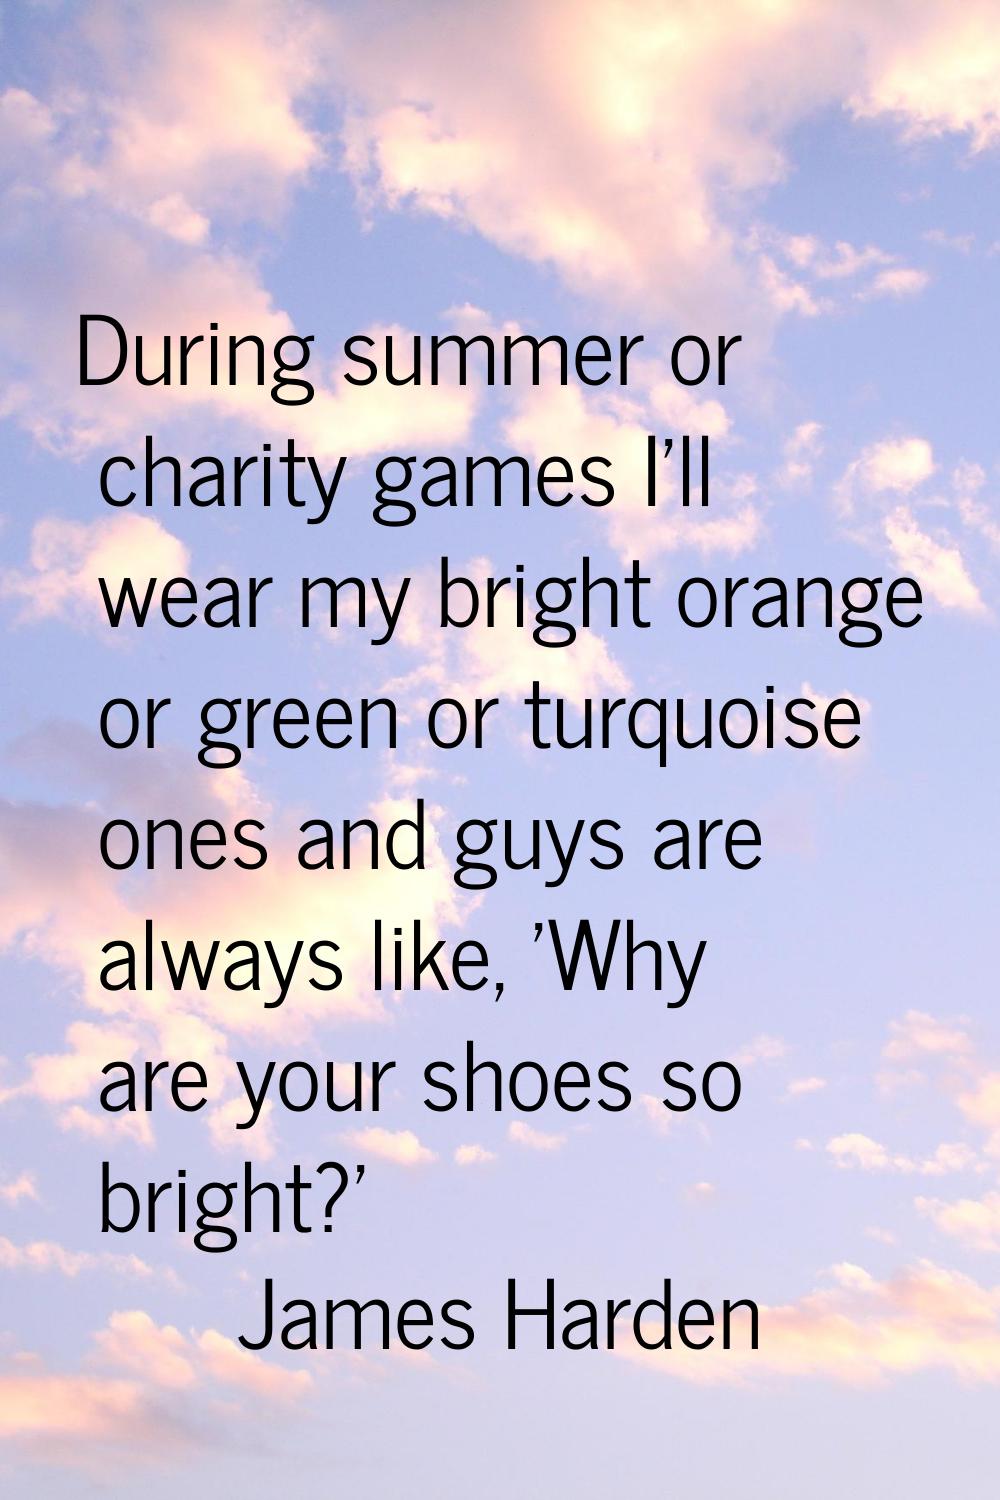 During summer or charity games I'll wear my bright orange or green or turquoise ones and guys are a